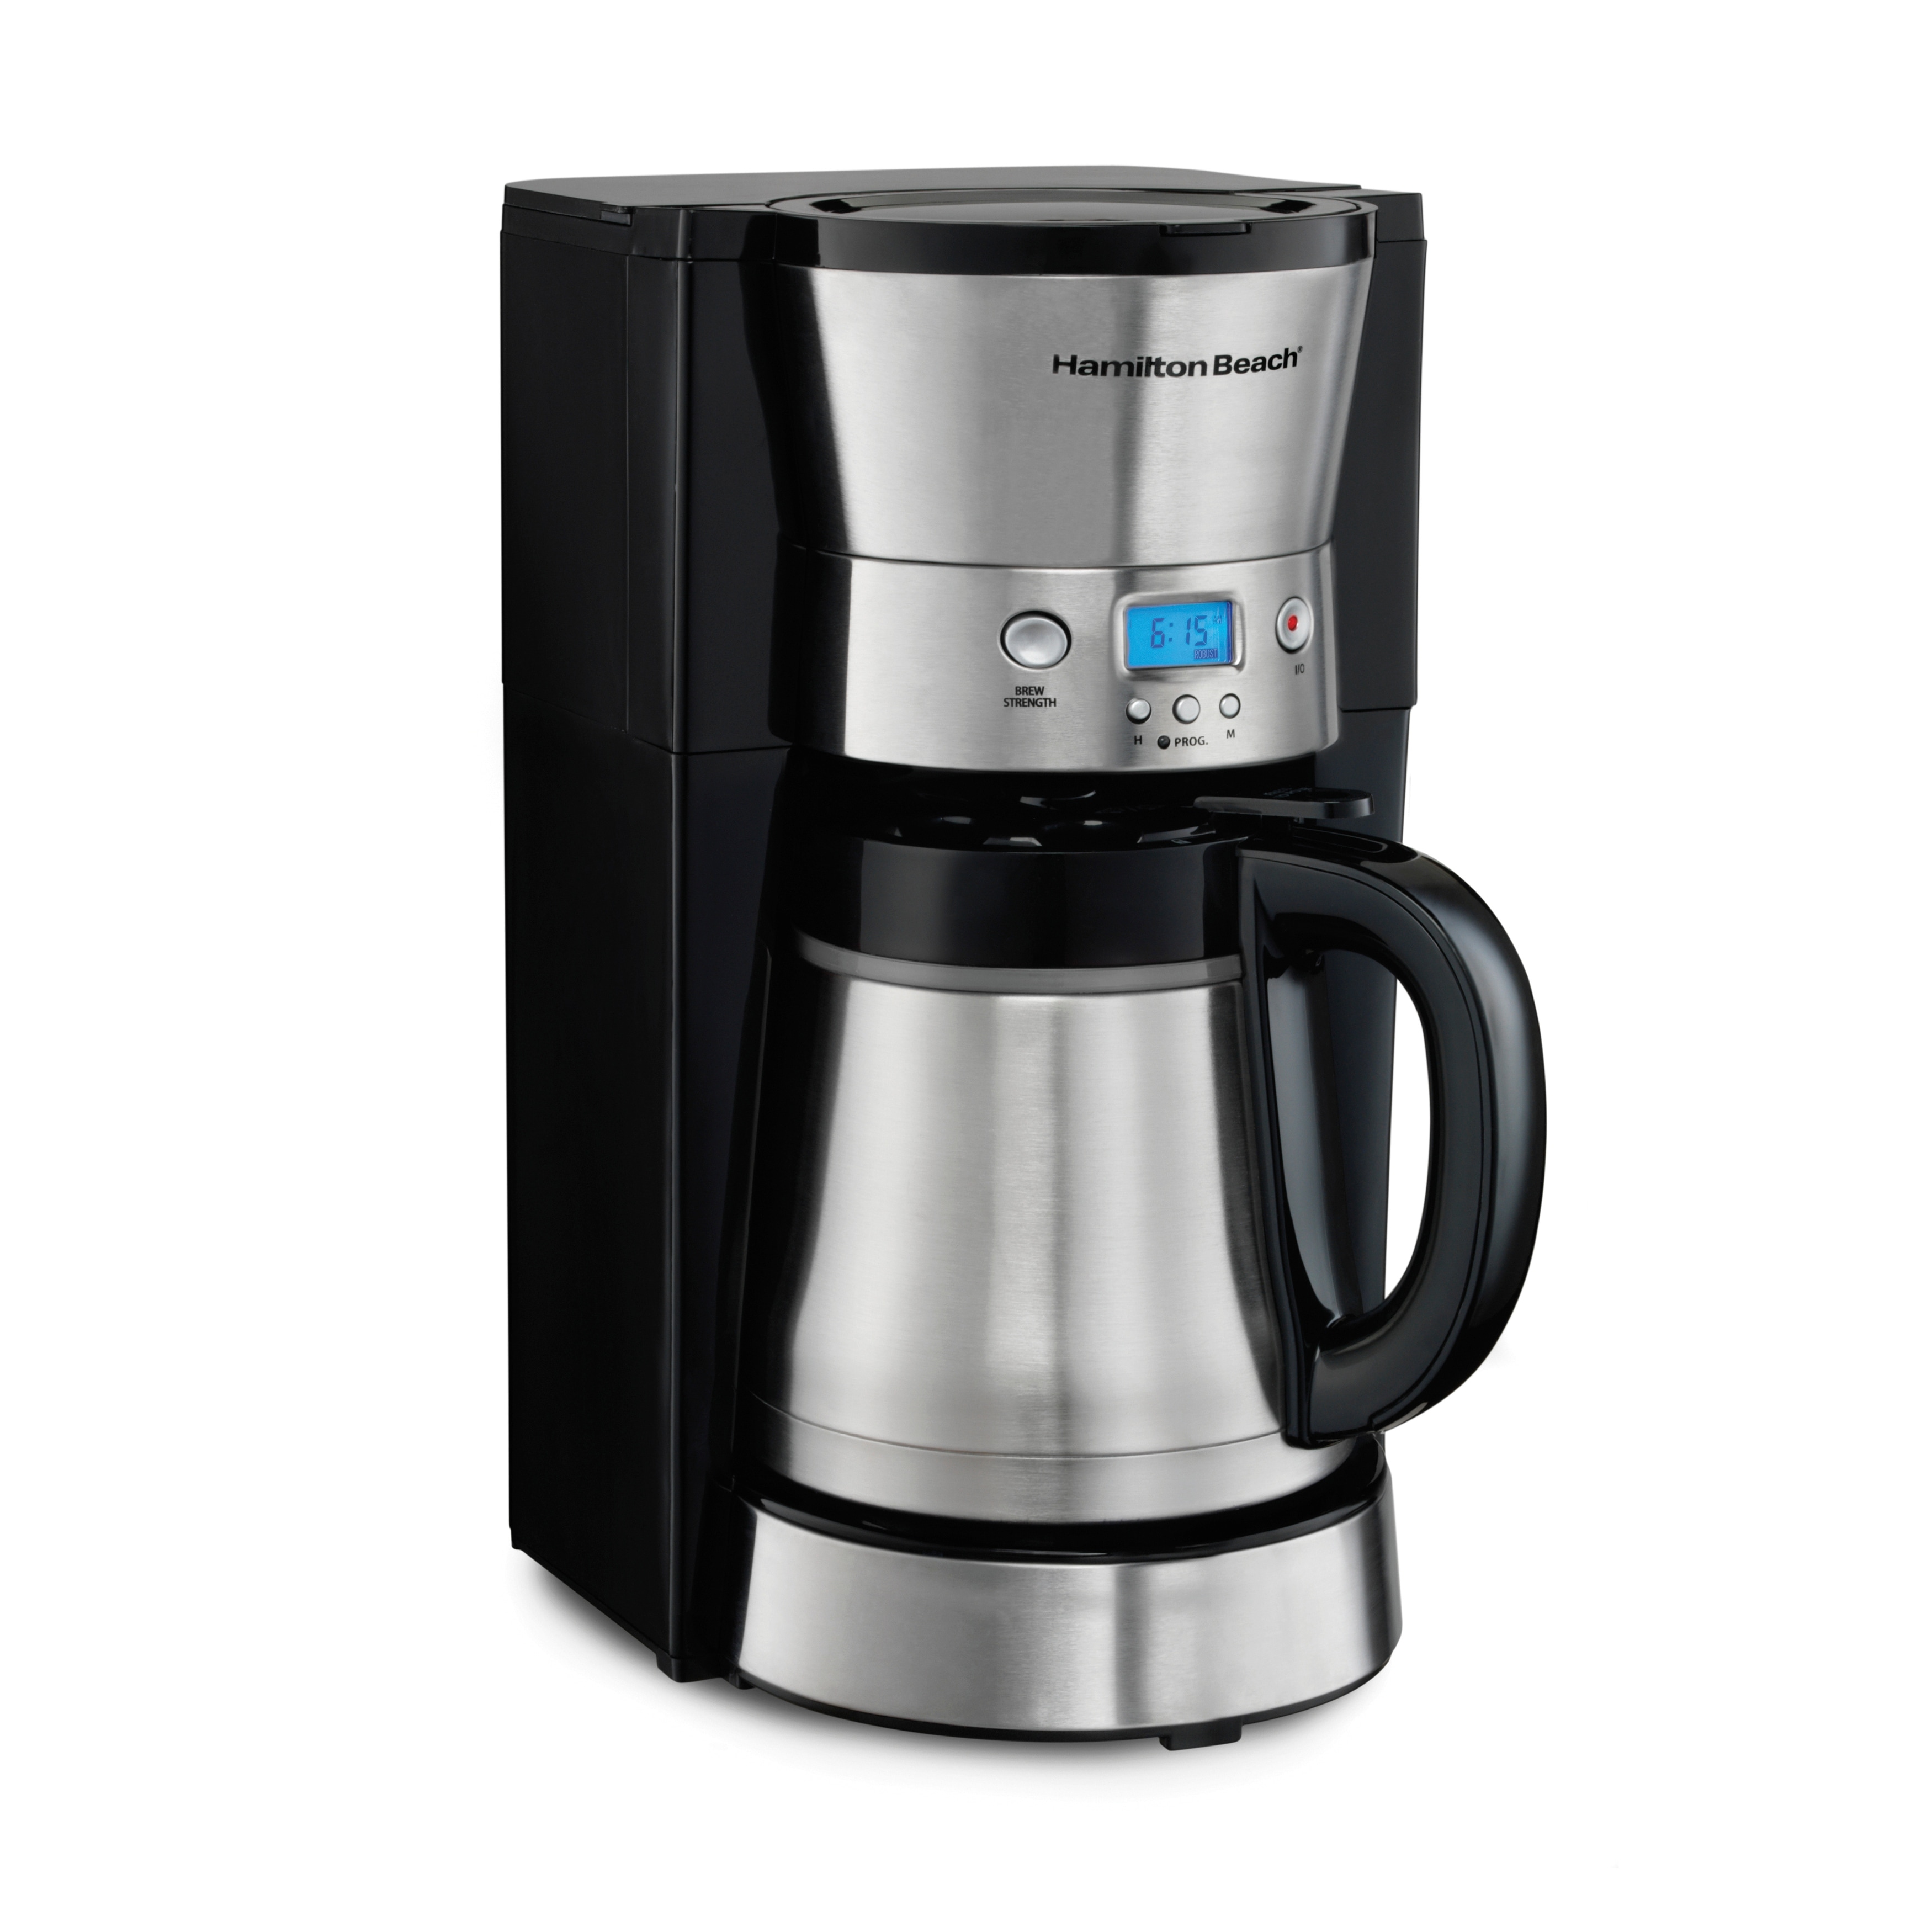 https://ak1.ostkcdn.com/images/products/is/images/direct/37f9643da608535593130e6e31fb6f42af5b3564/Hamilton-Beach-Programmable-Thermal-Coffee-Maker.jpg